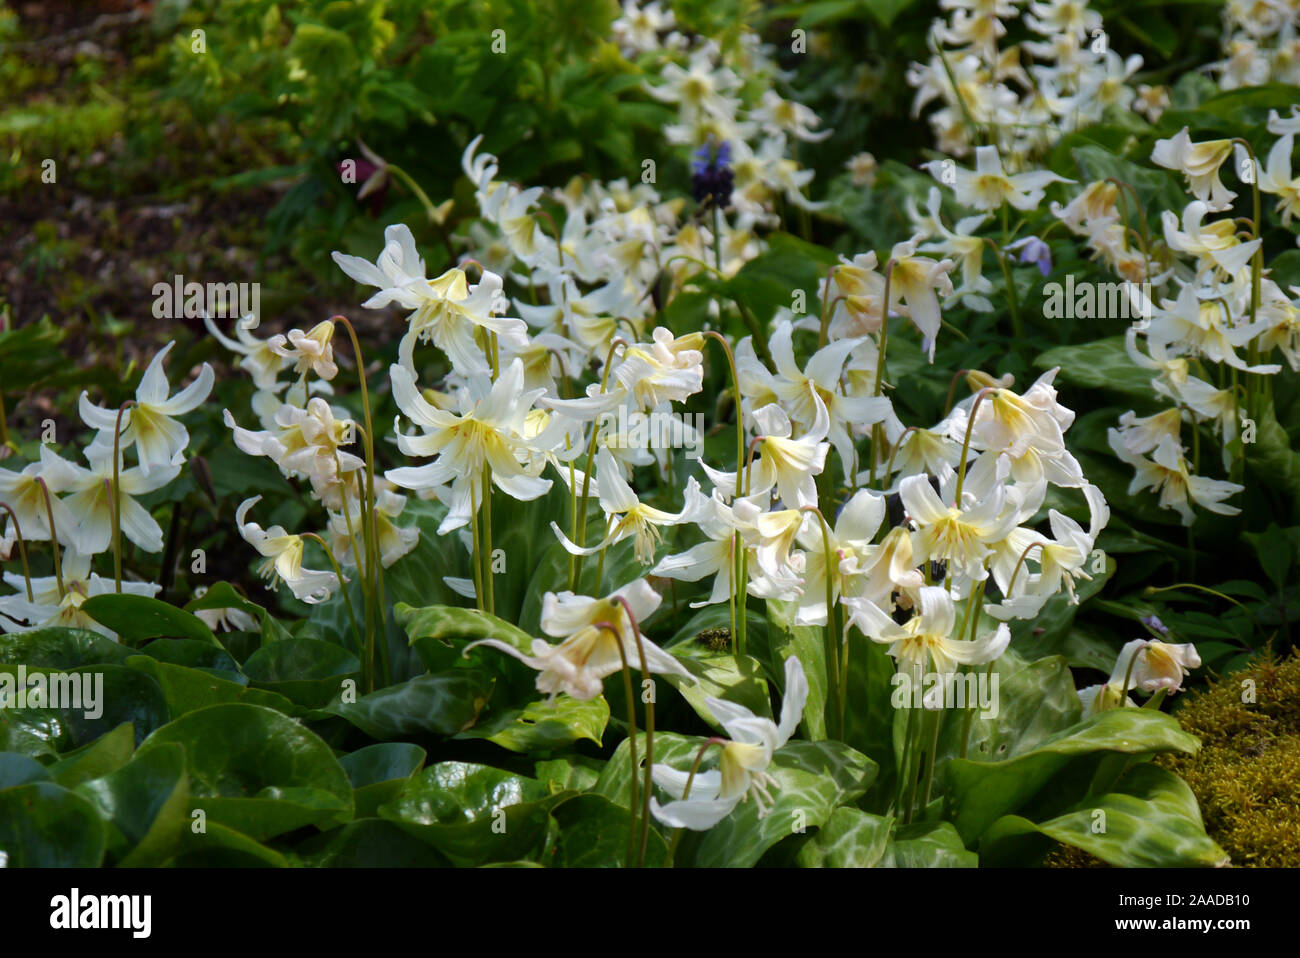 White Erythronium californicum 'White Beauty' (Fawn Lily) Flowers in a Border at RHS Garden Harlow Carr, Harrogate, Yorkshire. England, UK. Stock Photo